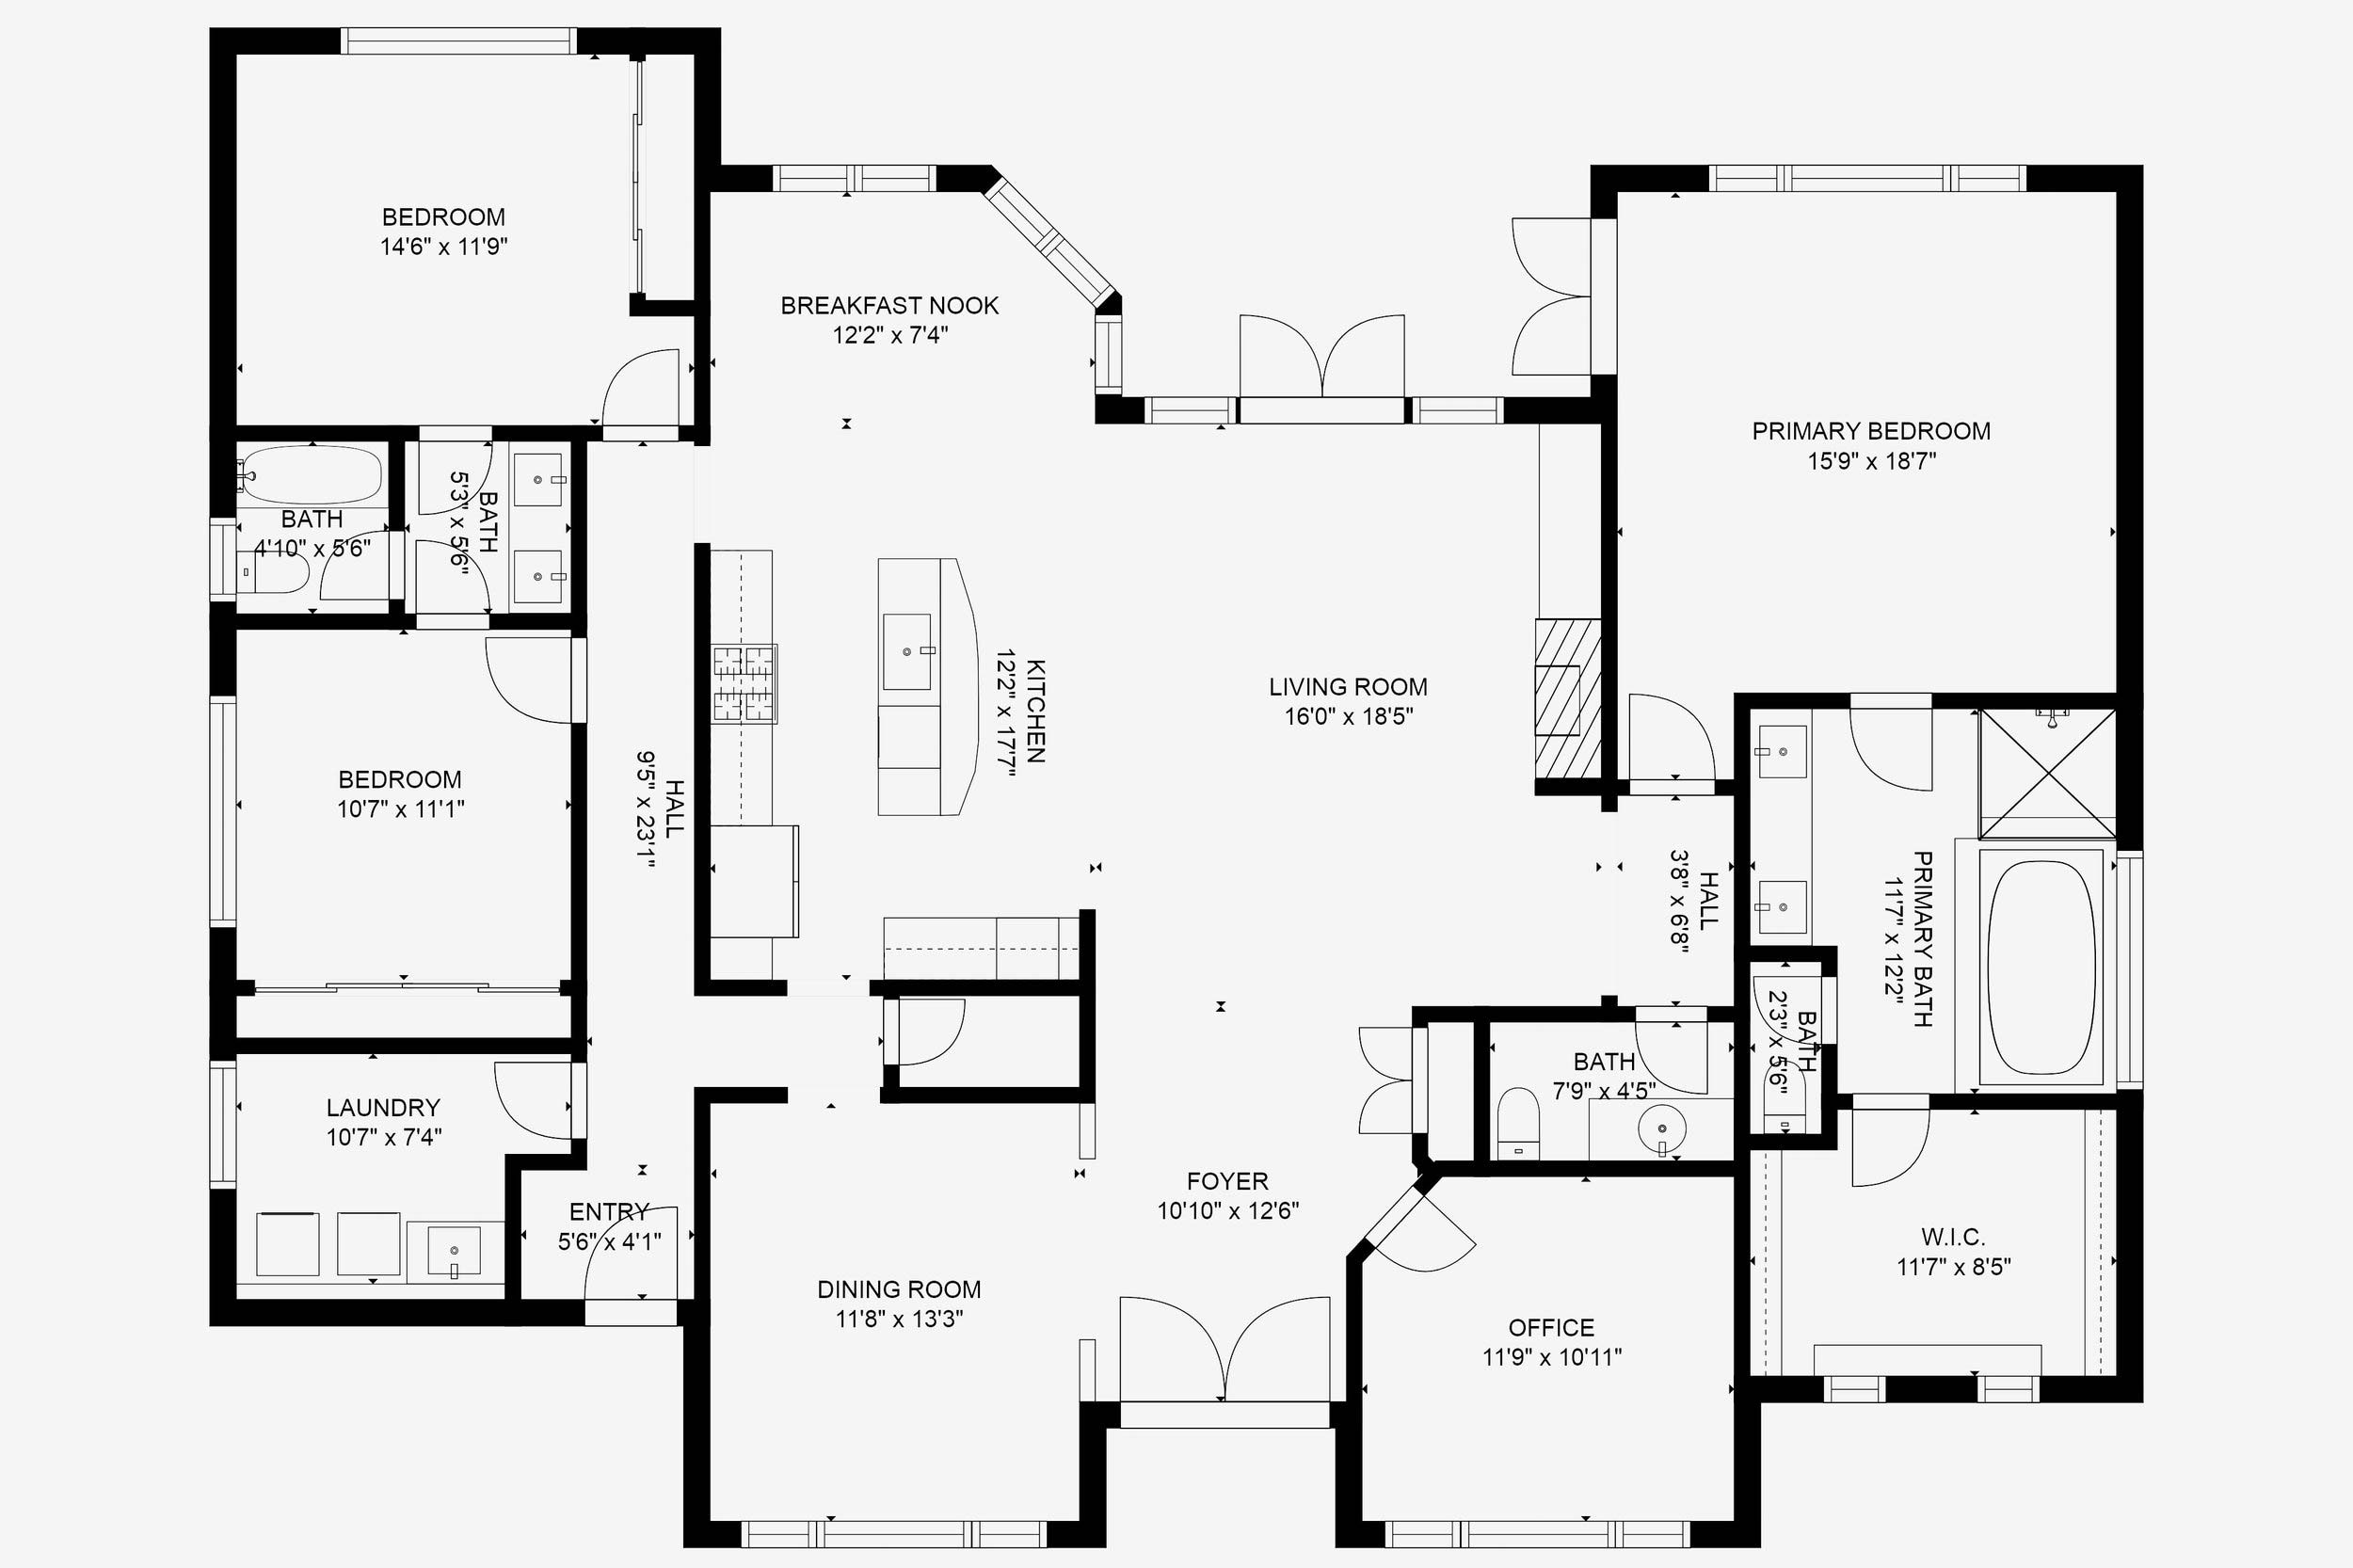 101 Pros - Floorplan Real Estate Photography Services